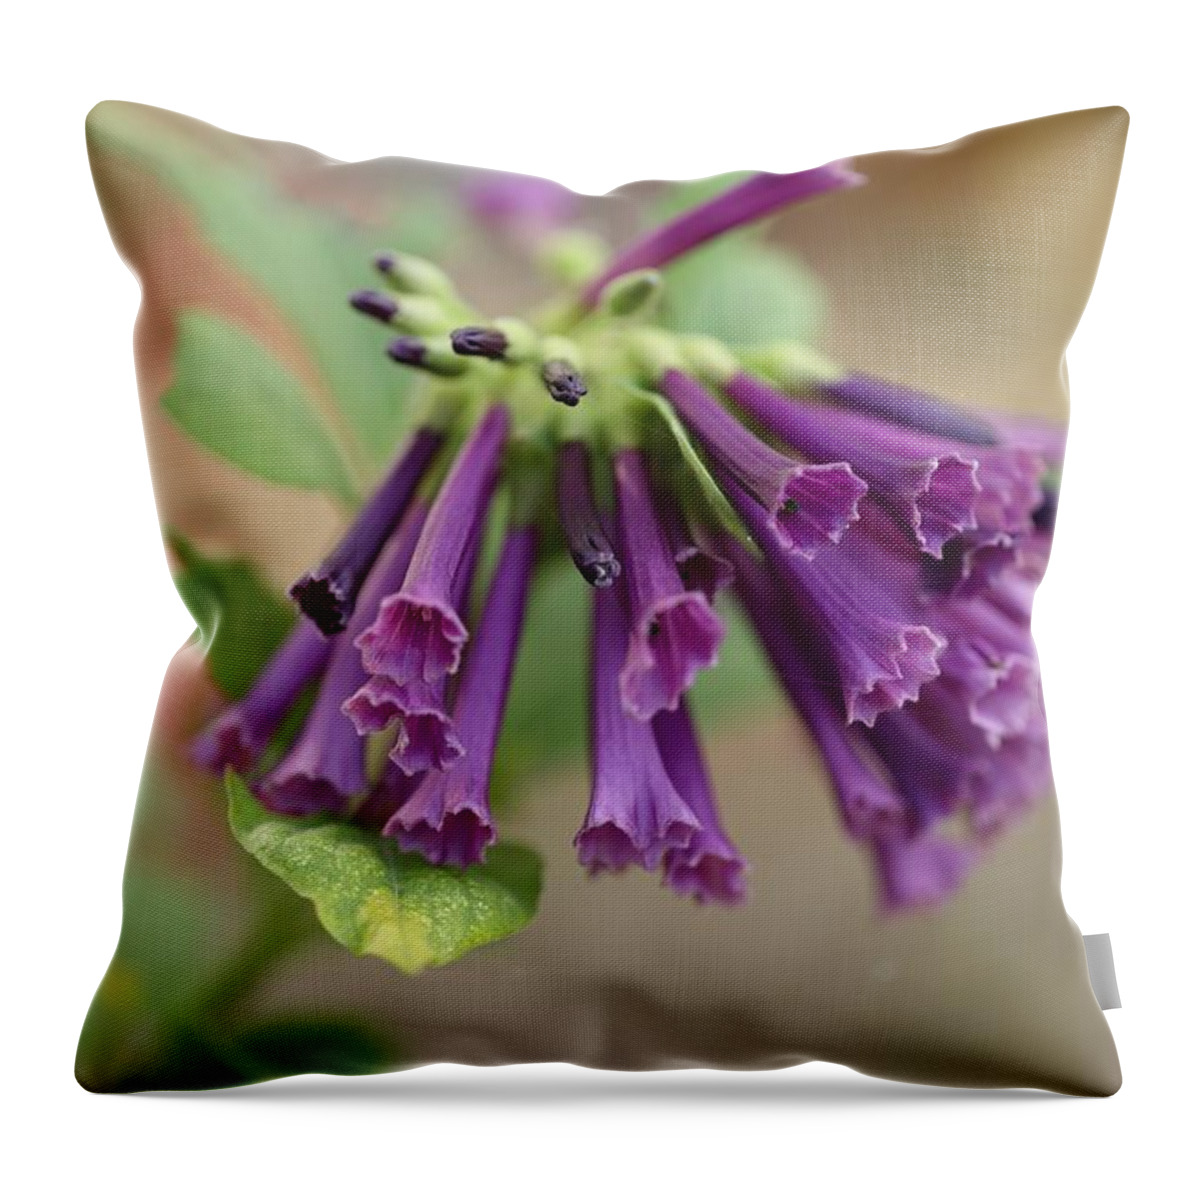 Trumpet Flower Throw Pillow featuring the photograph Mini Trumpet Flowers by Mingming Jiang